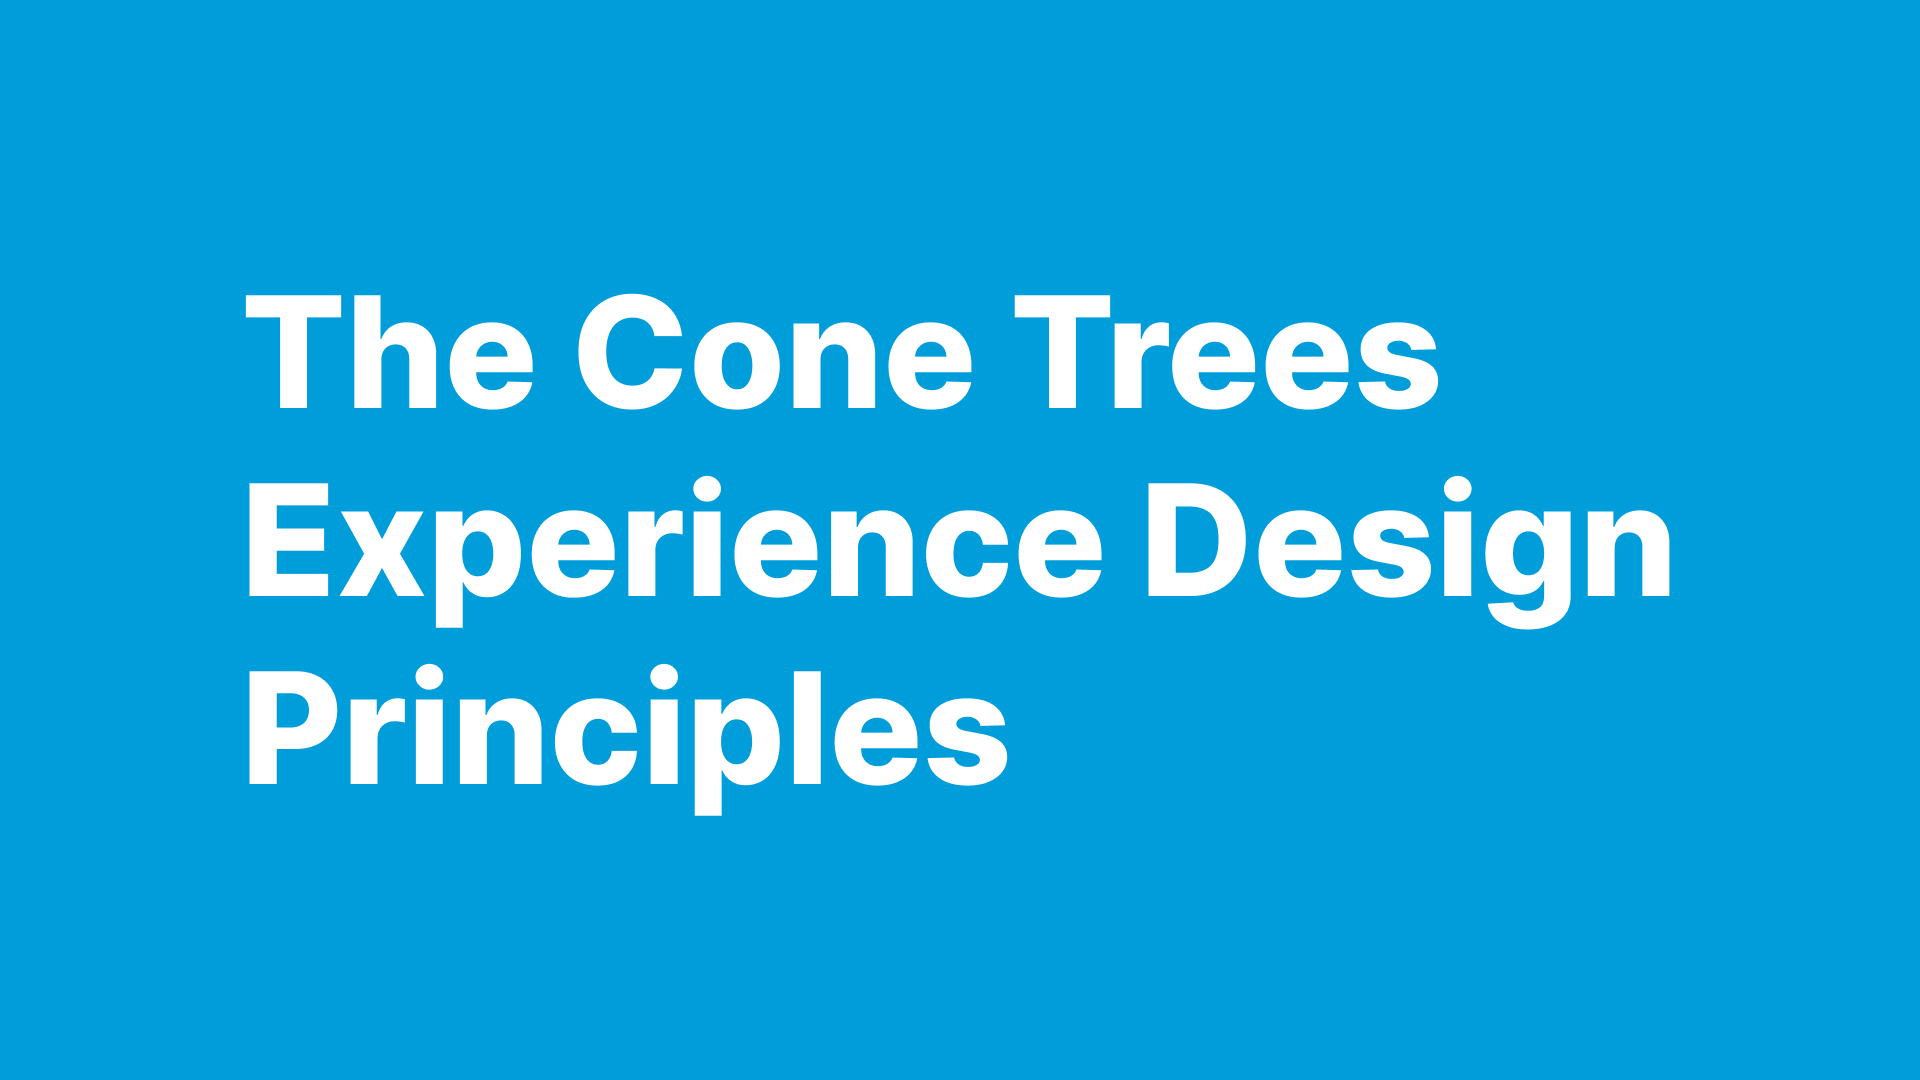 The Cone Trees Experience Design Principles